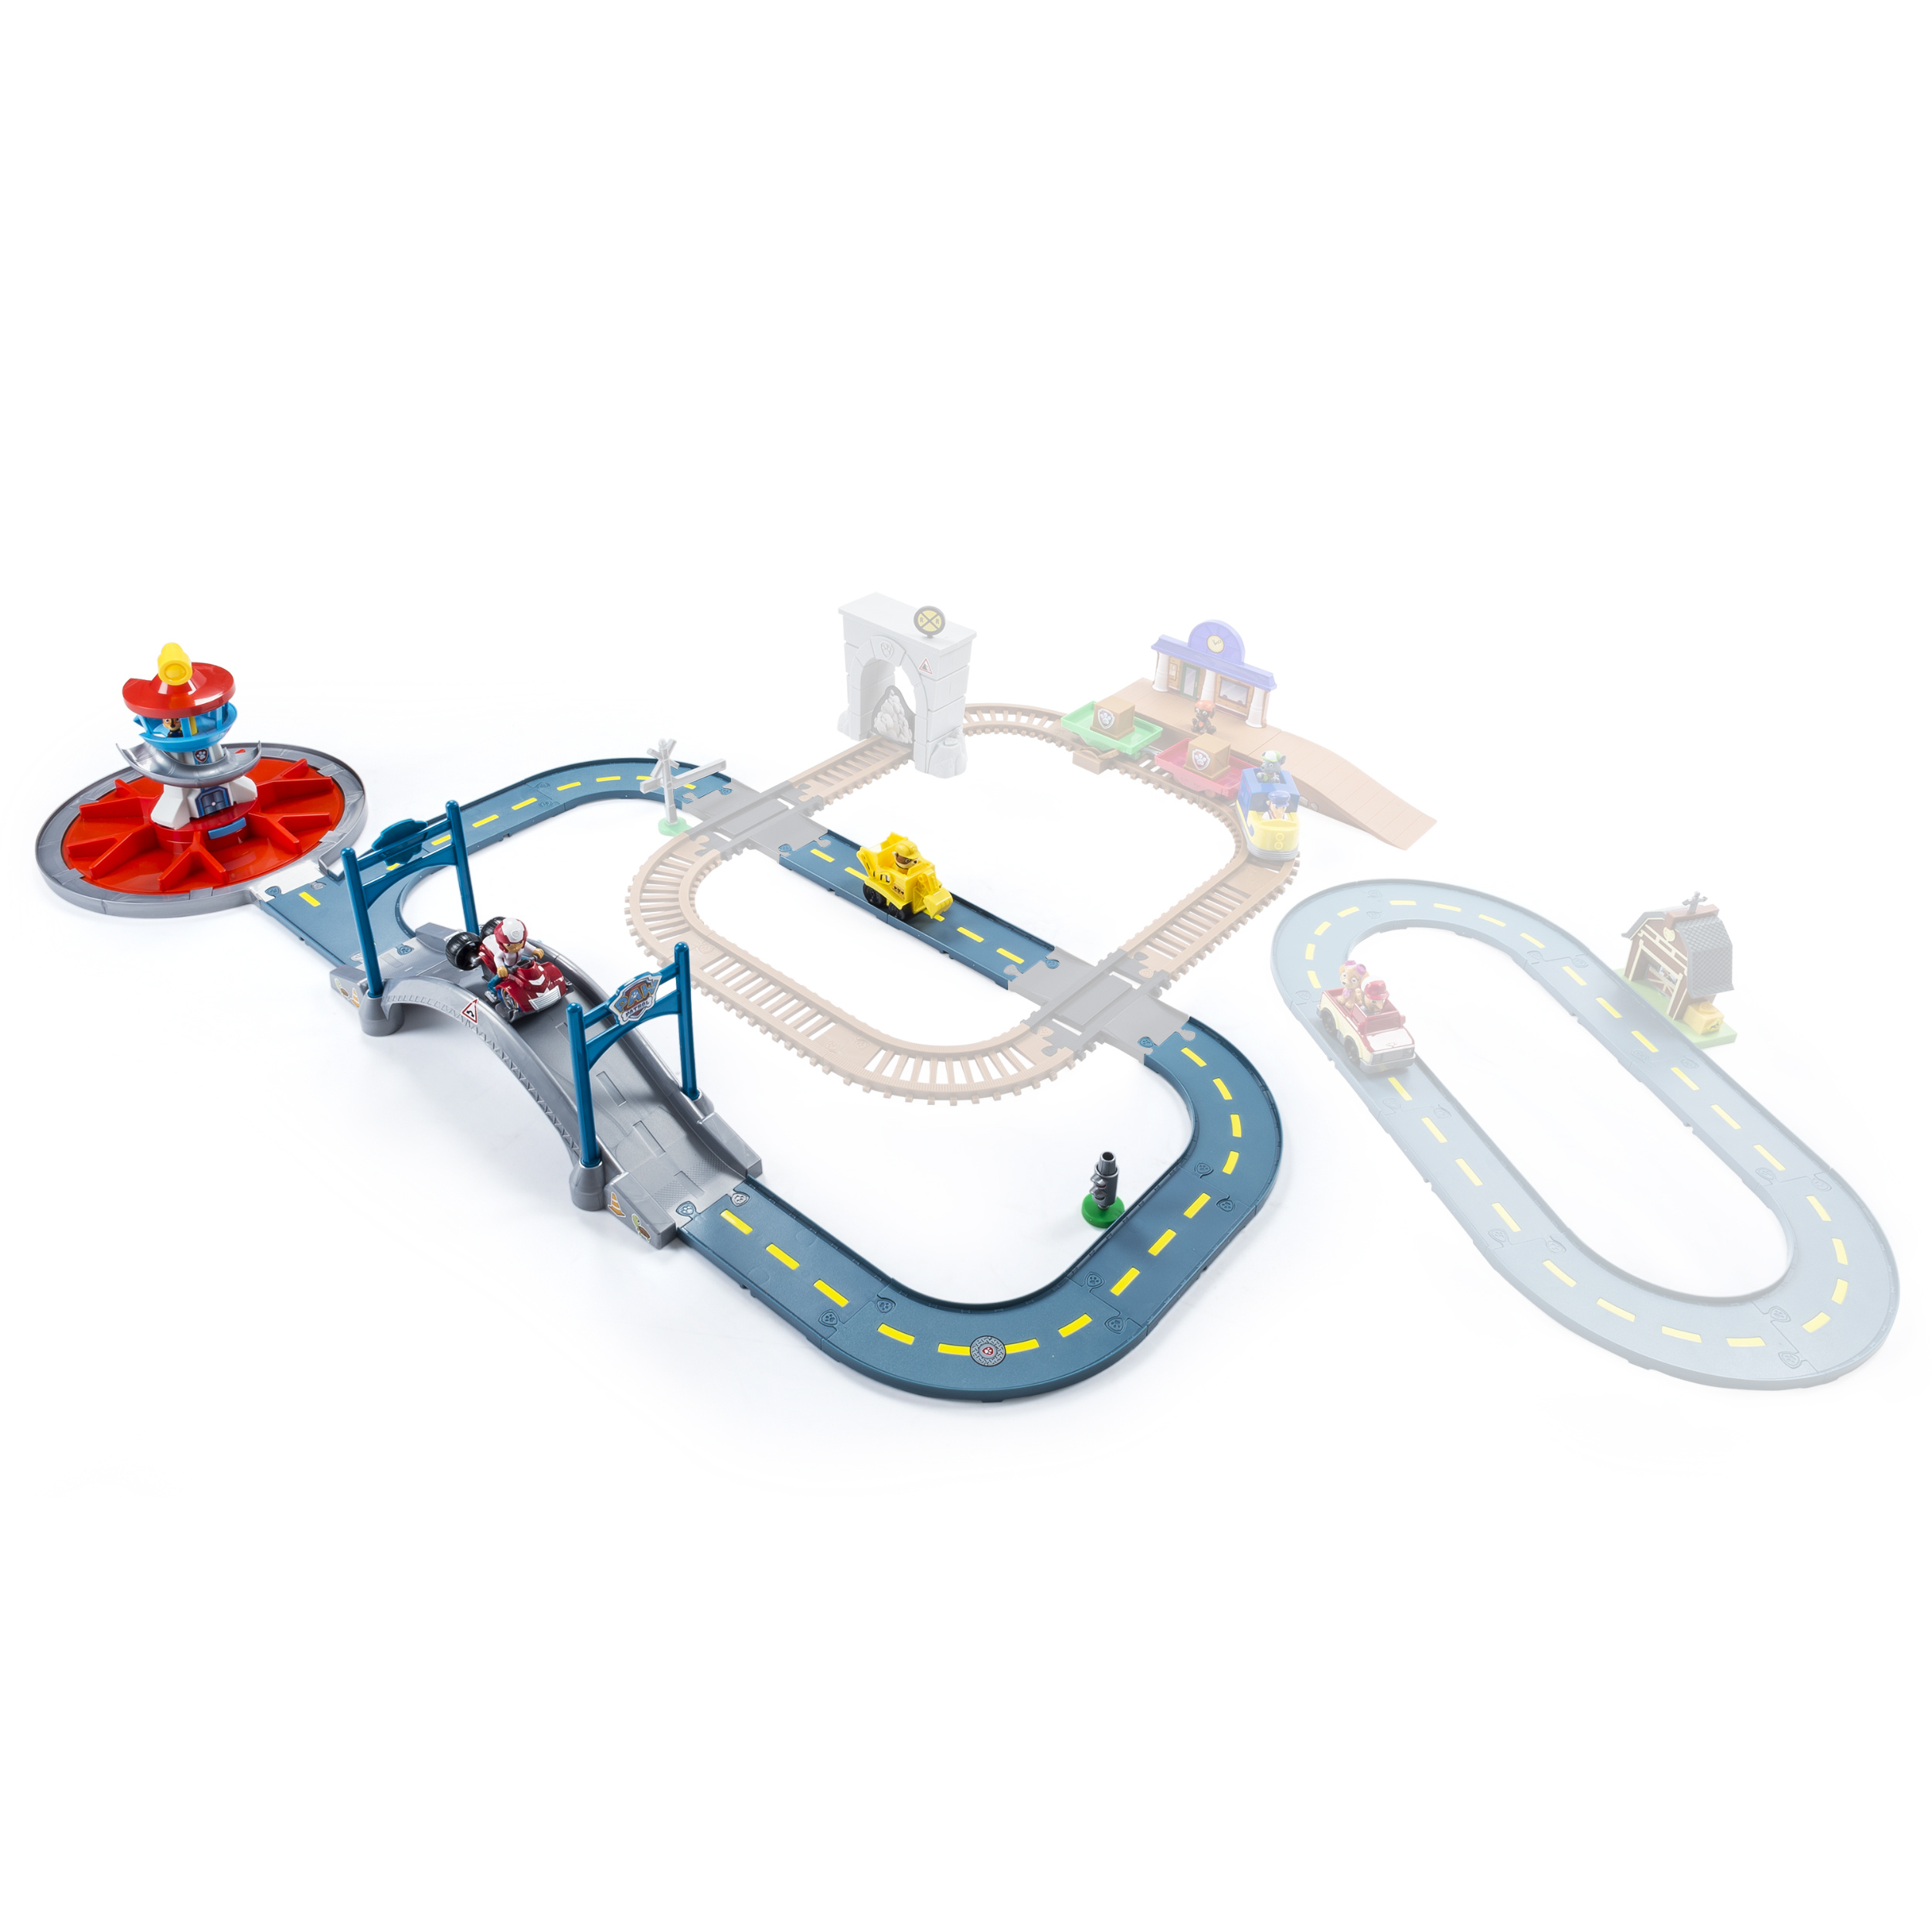 Paw Patrol - Launch N Roll Lookout Tower Track Set - image 4 of 8